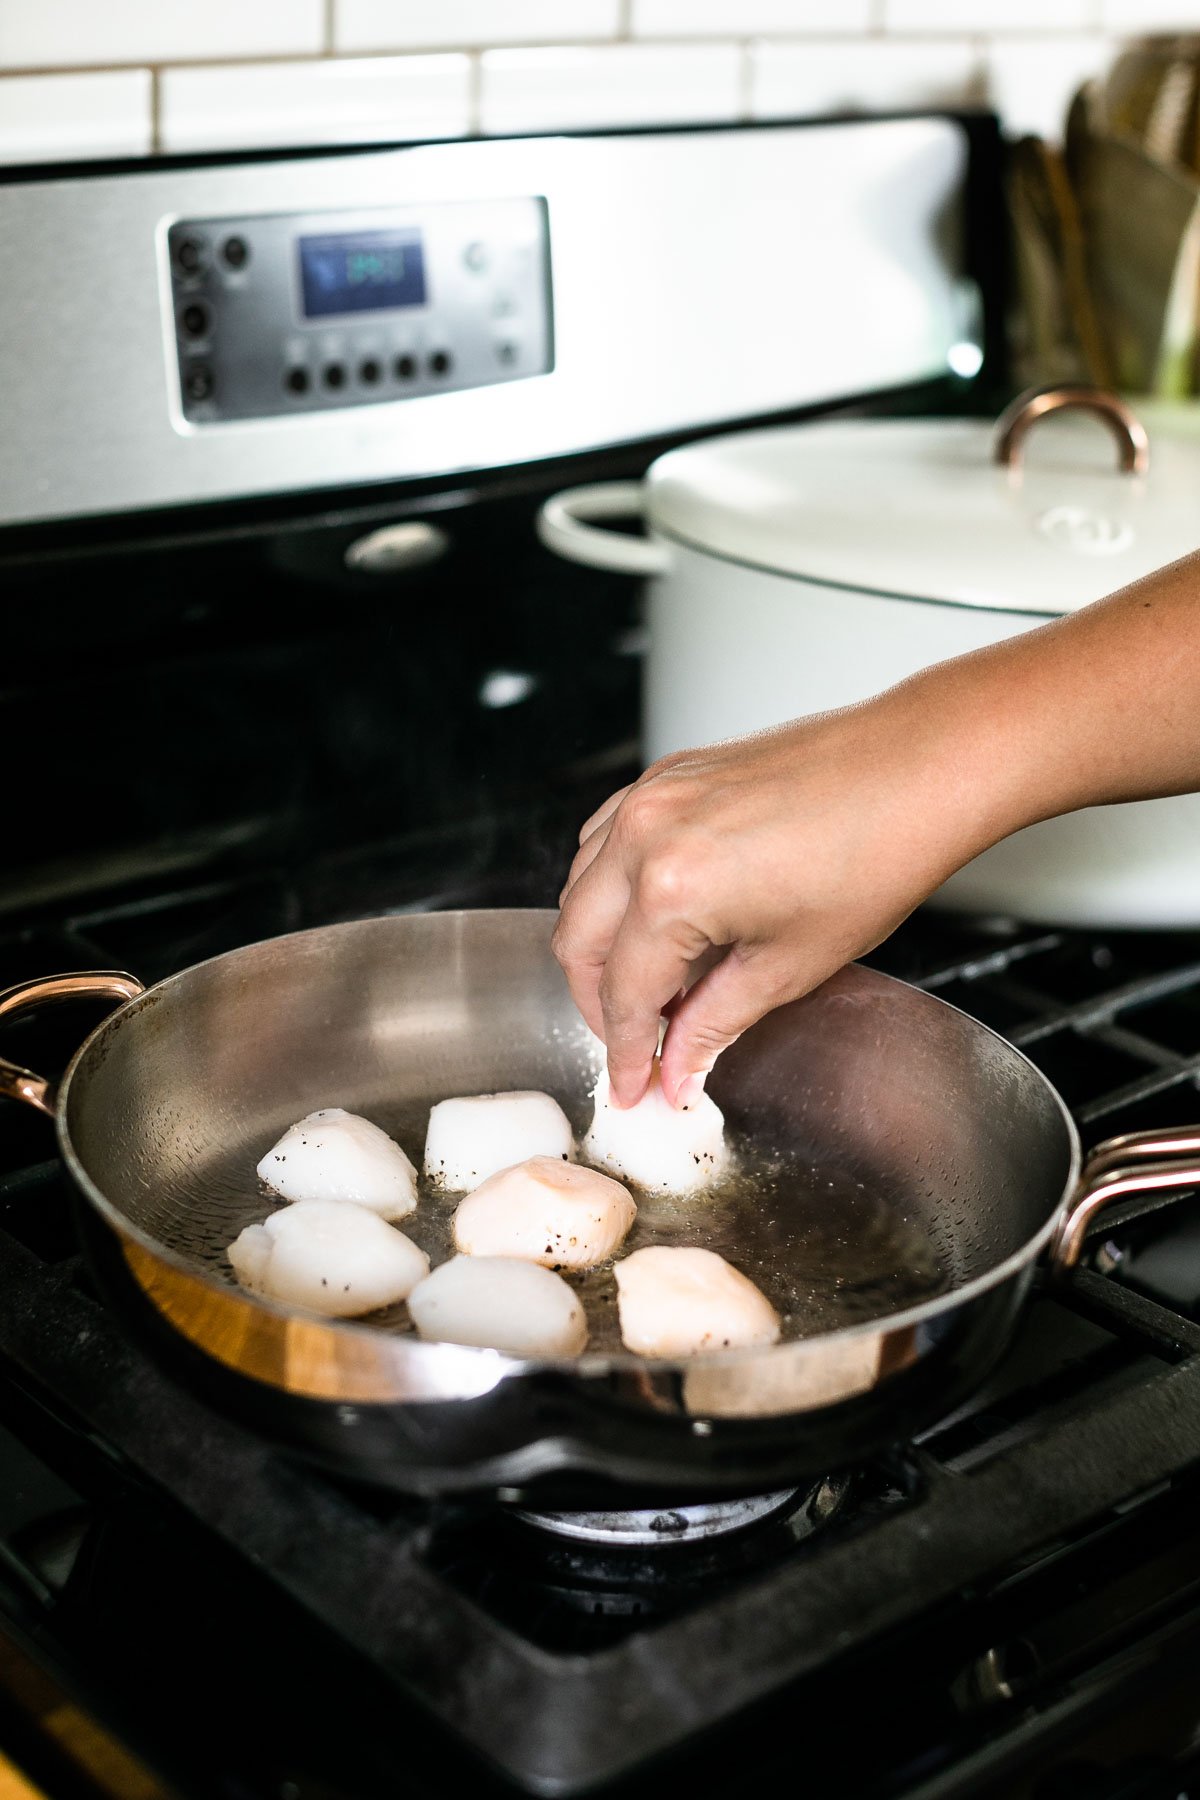 How to sear scallops, Step 3 – A woman's hand shown adding sea scallops to stainless steel skillet. The skillet sits atop a gas range with a white Dutch oven in the background.